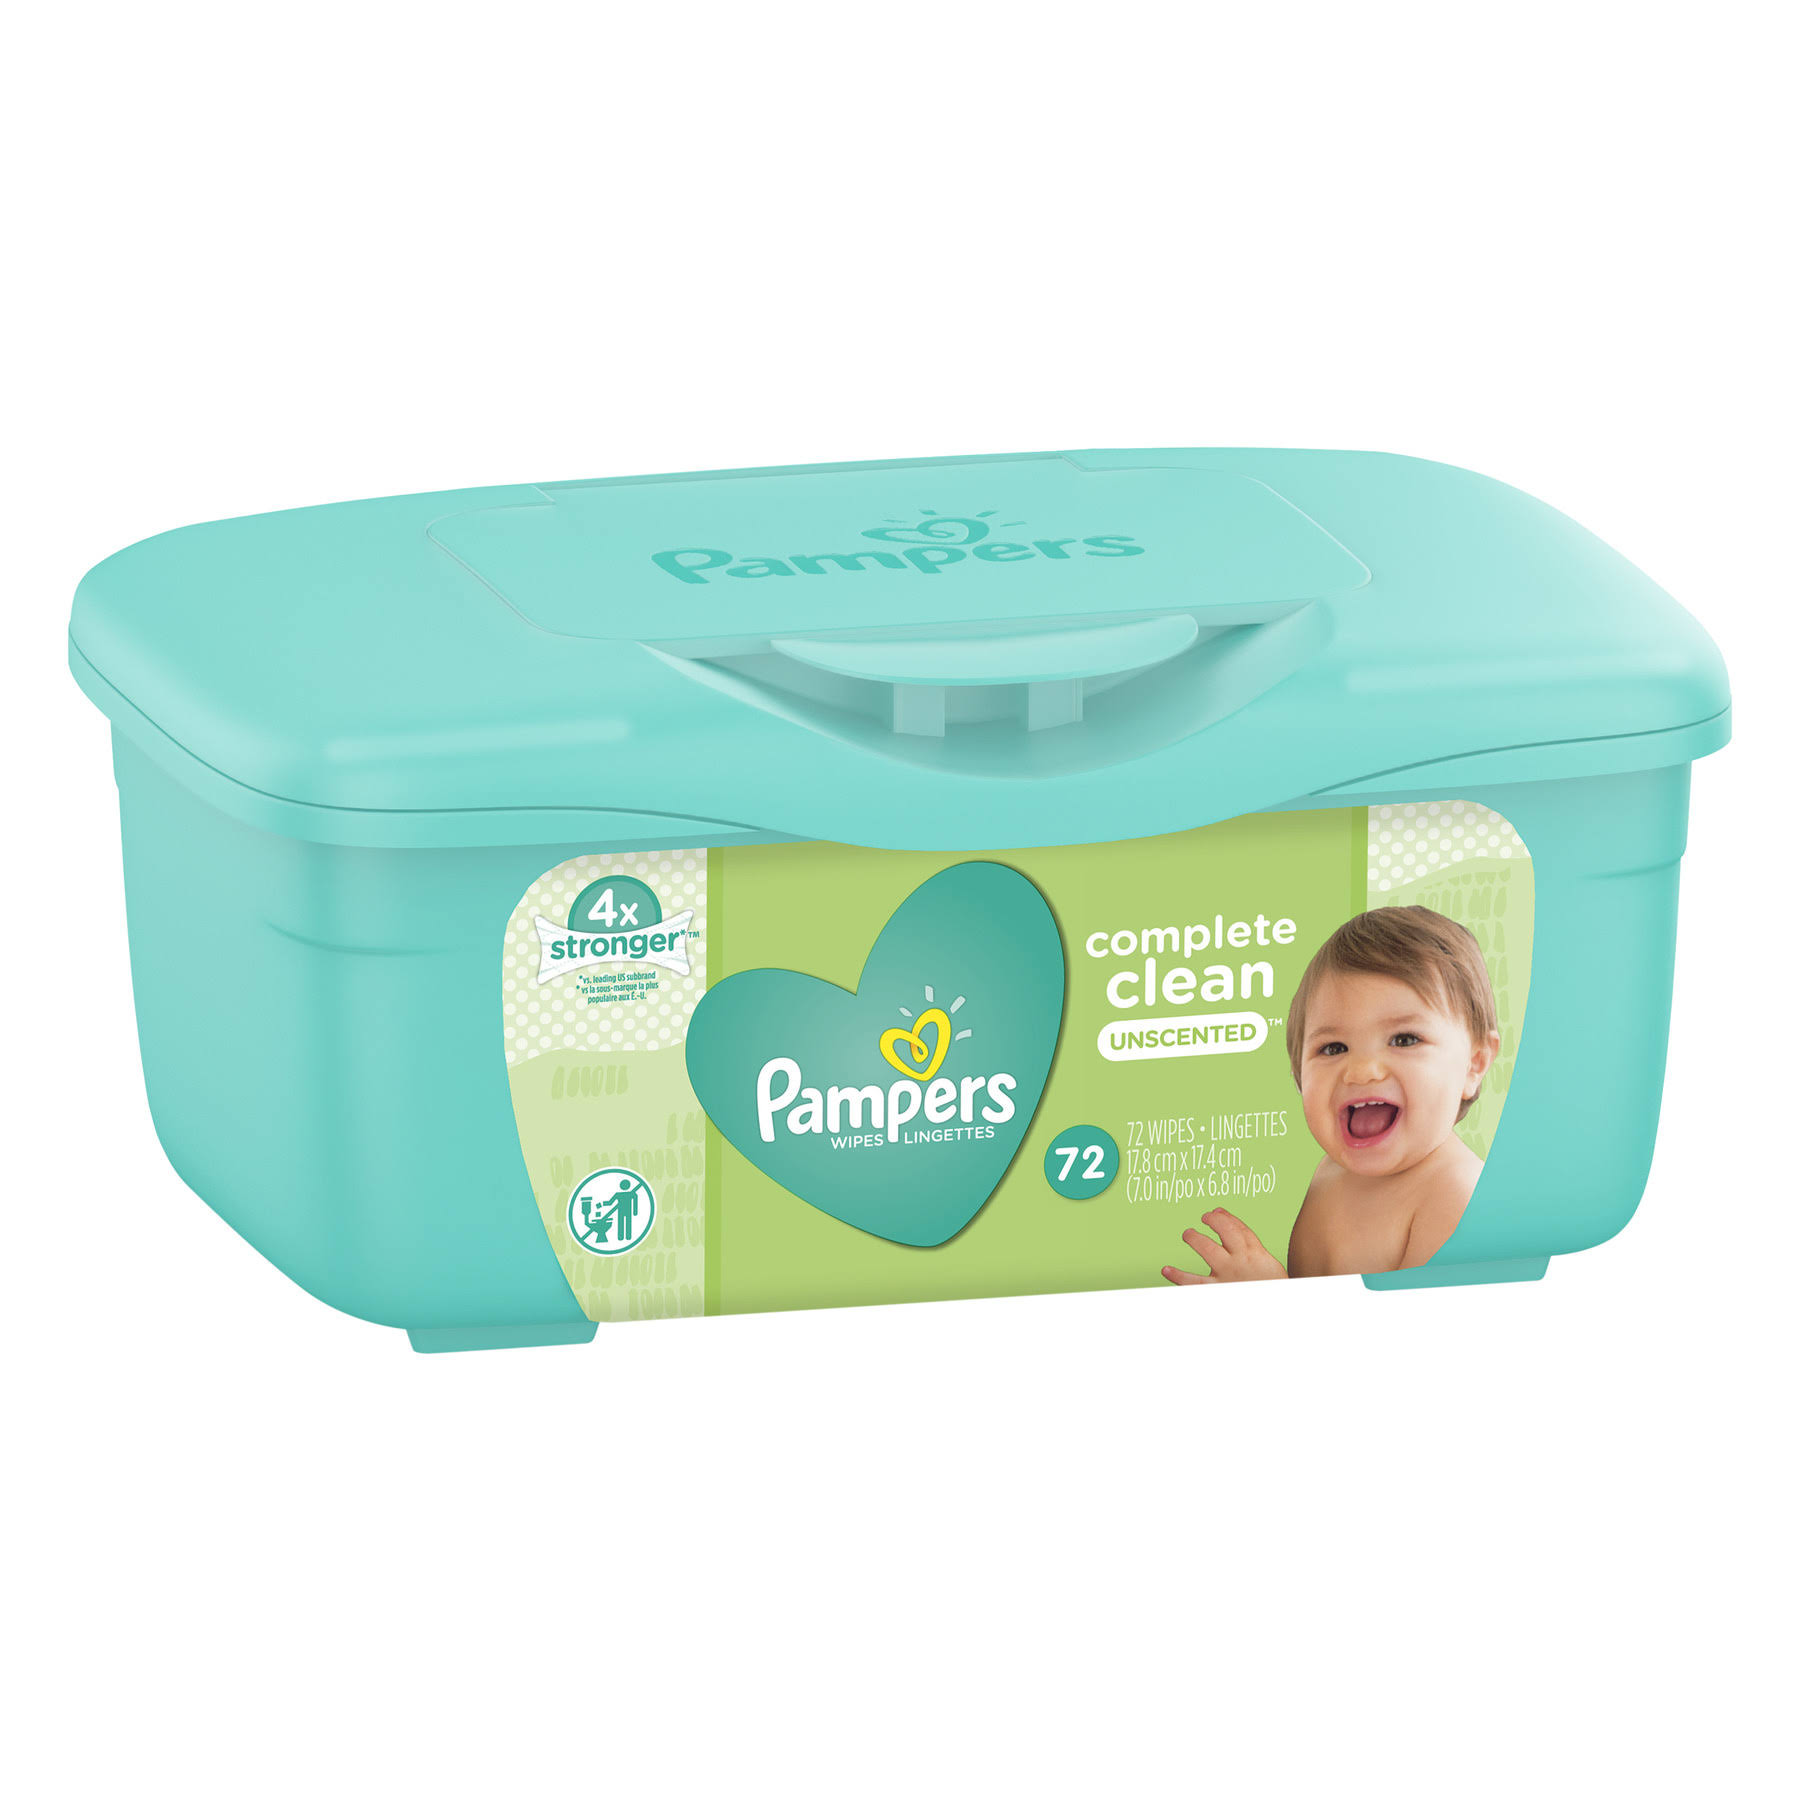 Pampers Complete Clean Baby Wipes - Unscented, 72ct